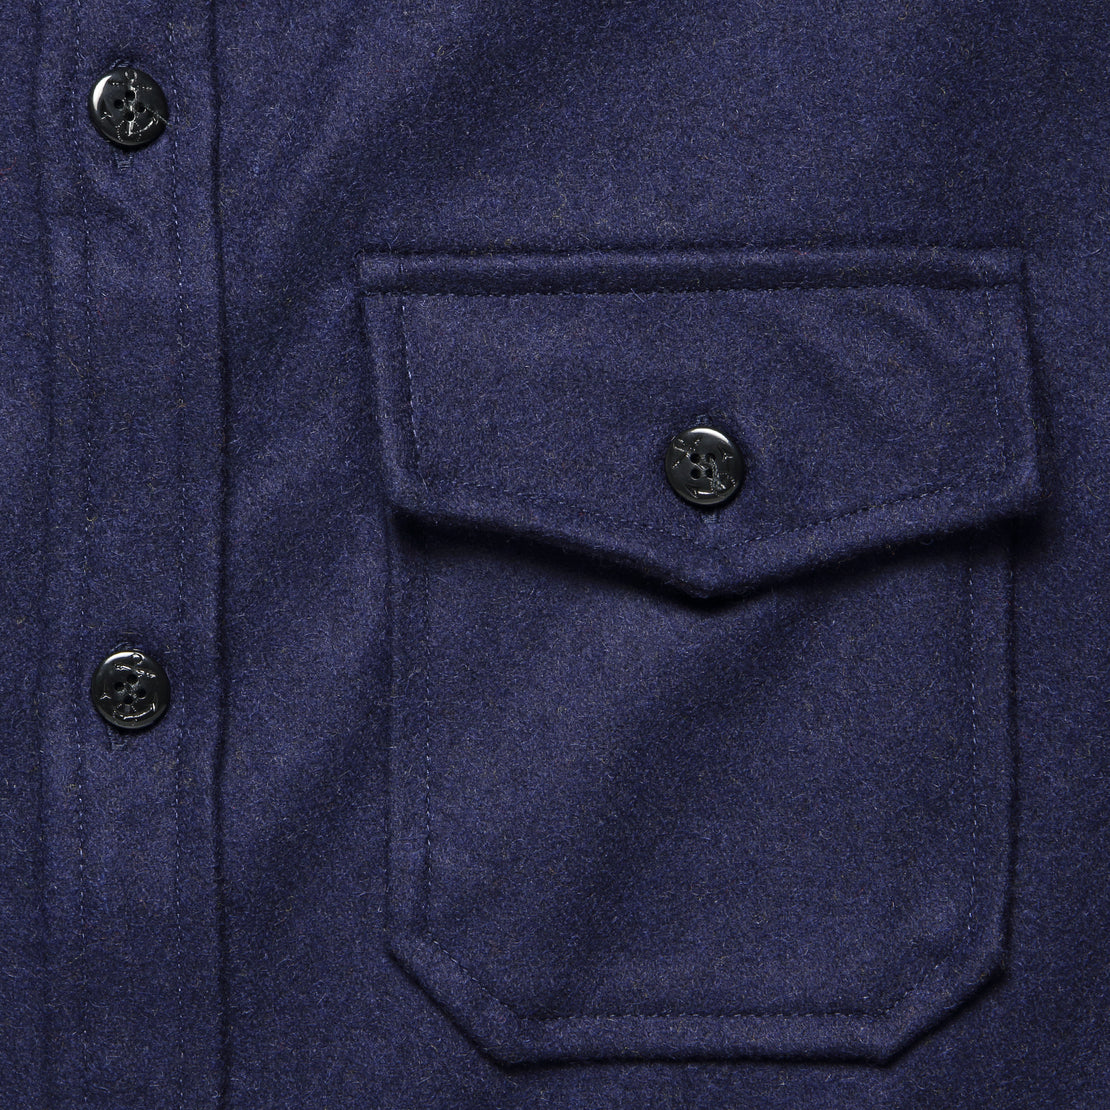 CPO Wool Shirt - Blue - Schott - STAG Provisions - Tops - L/S Woven - Overshirt